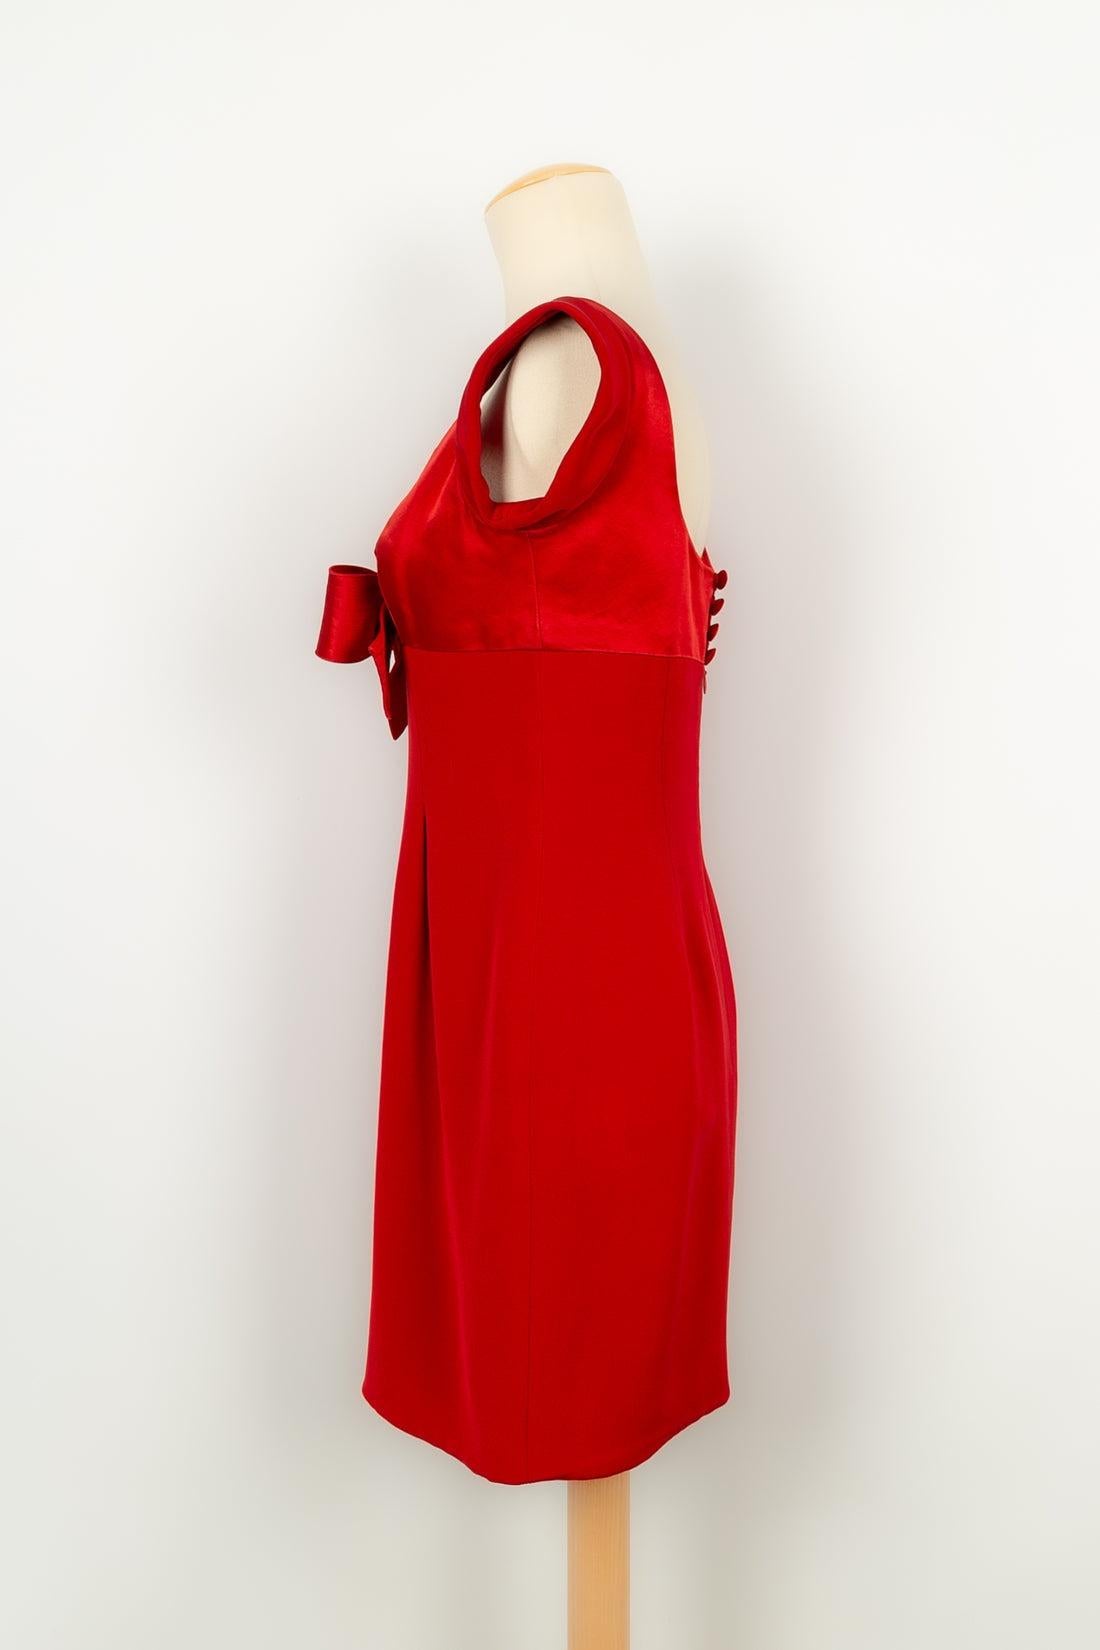 Women's Christian Lacroix Haute Couture Dress in Red Silk with Silk Lining, 1995 For Sale